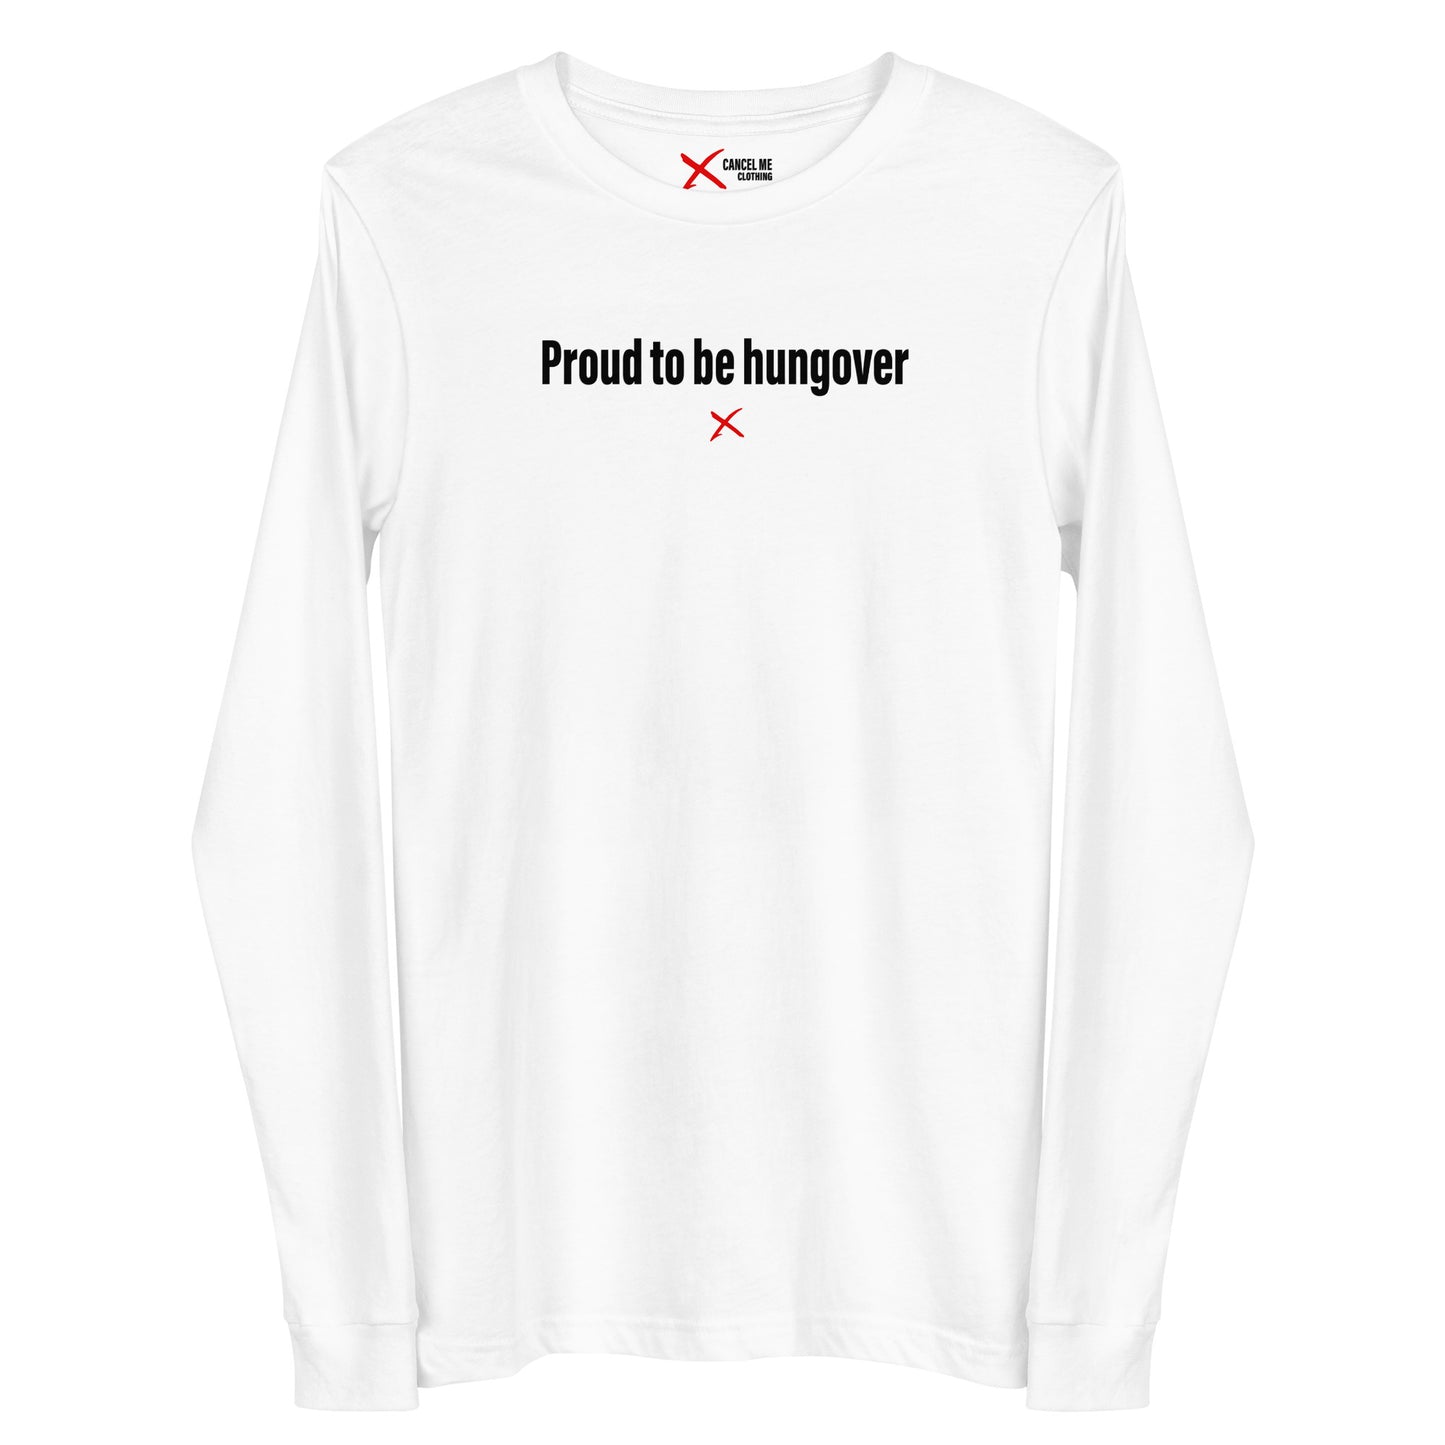 Proud to be hungover - Longsleeve